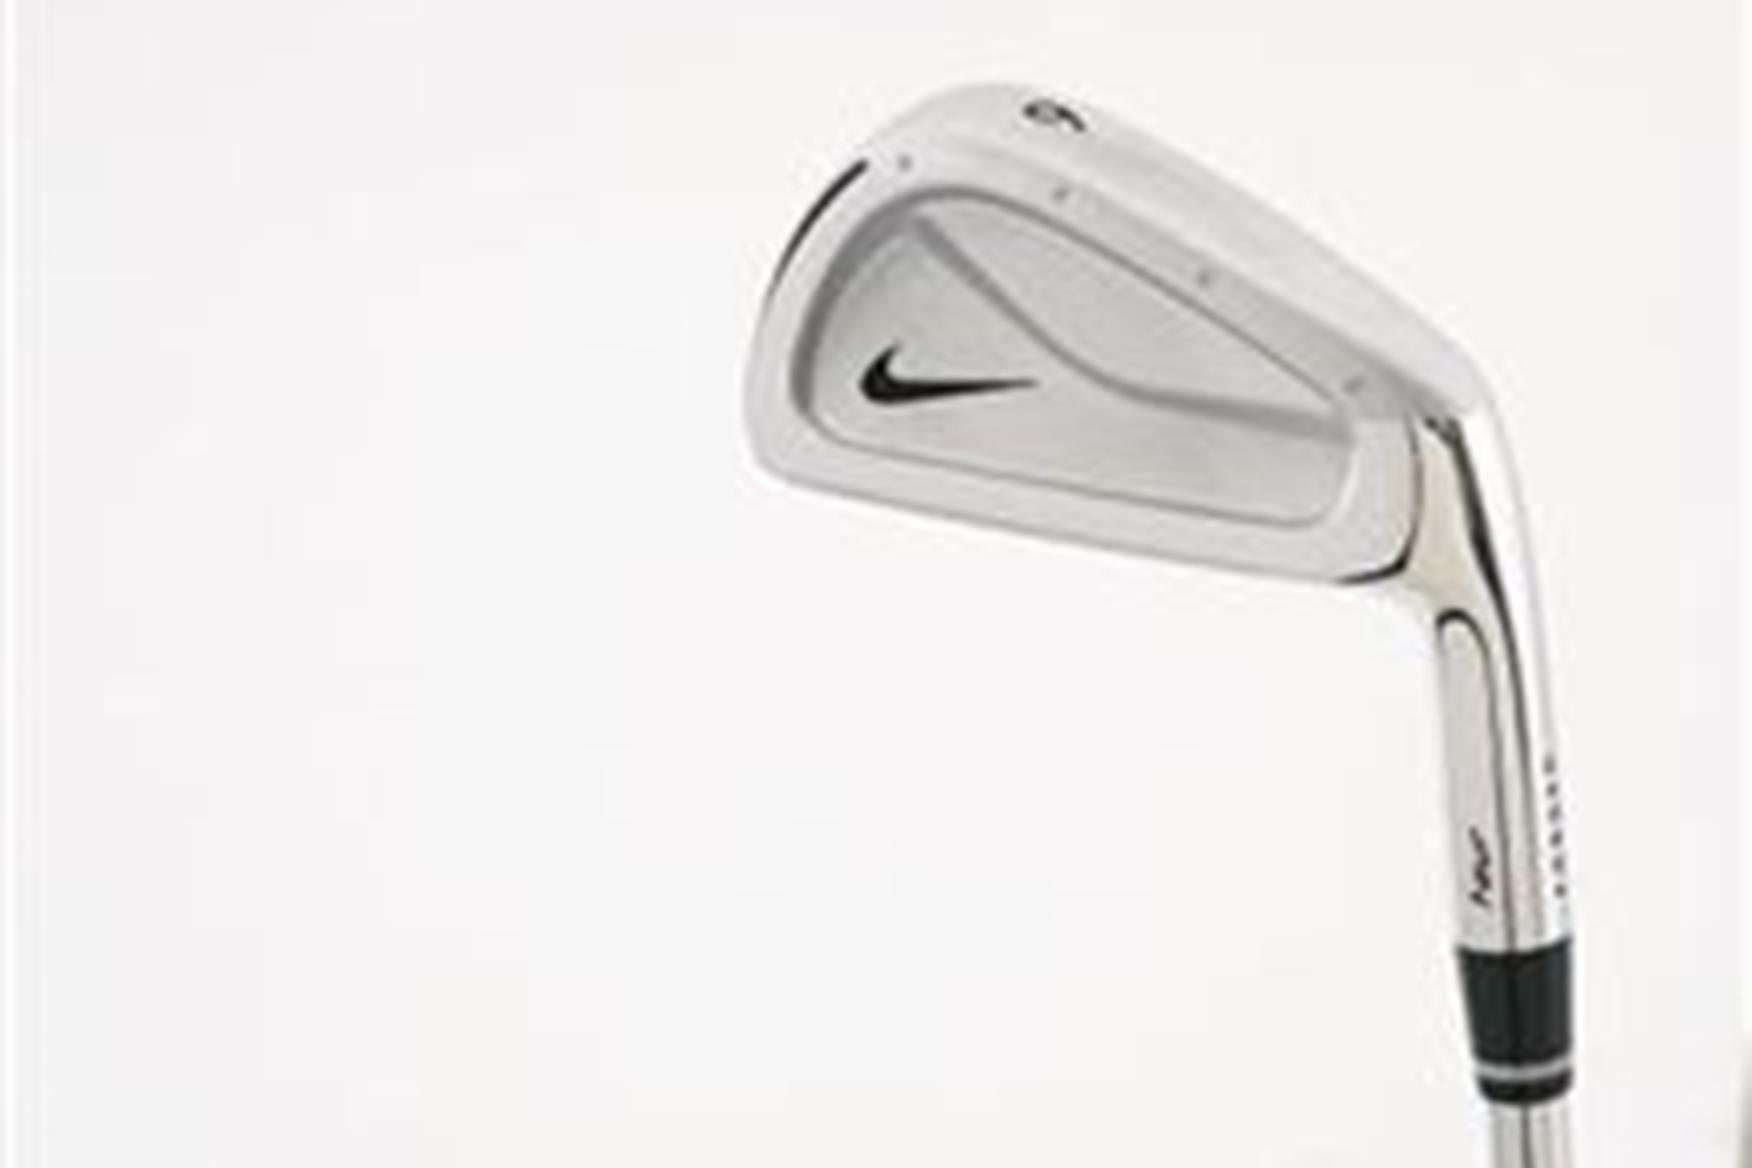 Nike Golf Pro Combo Tour Better Player Irons Review | Equipment Reviews |  Today's Golfer